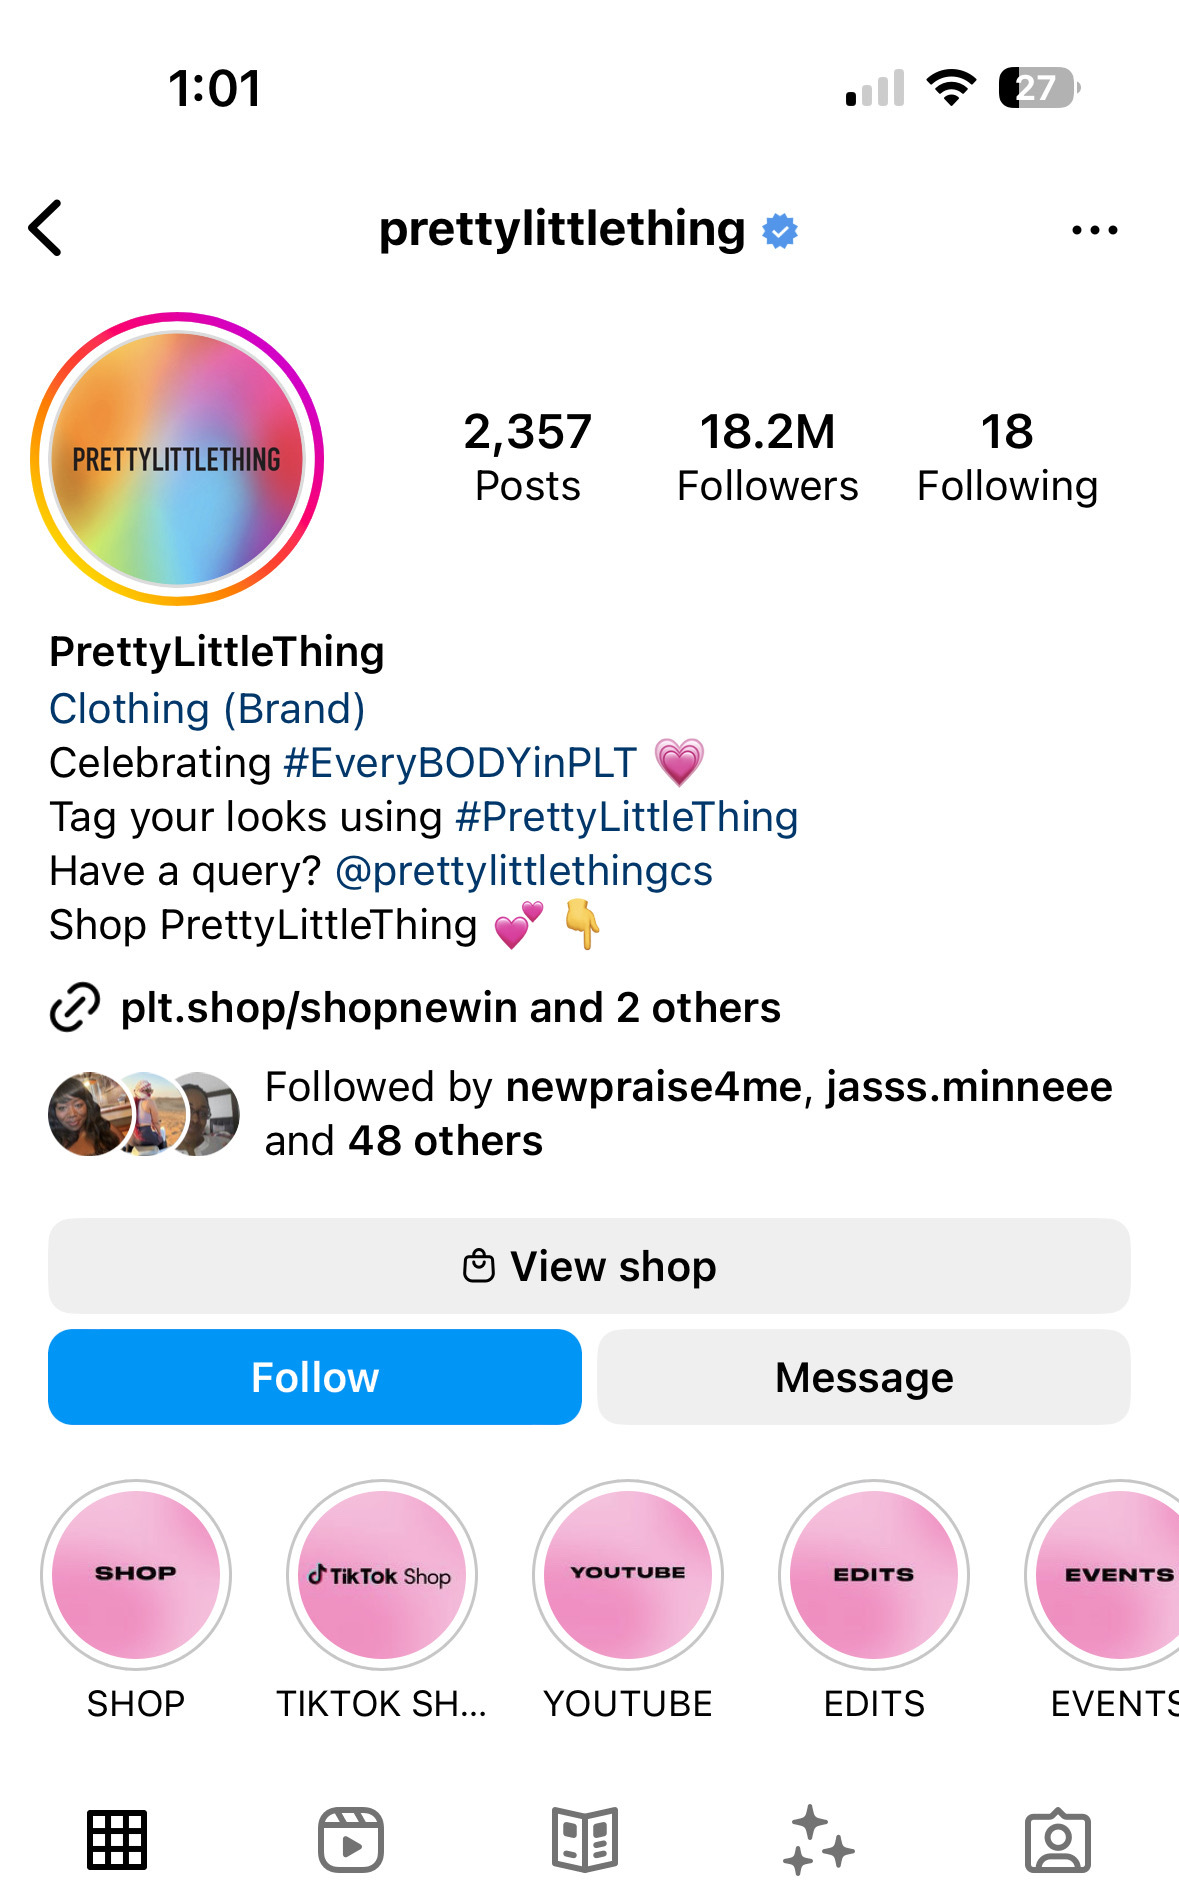 Pretty Little Thing Instagram page. The clothing brand include two branded hashtags in the bio, #EveryBODYinPLT and #PrettyLittleThing. 